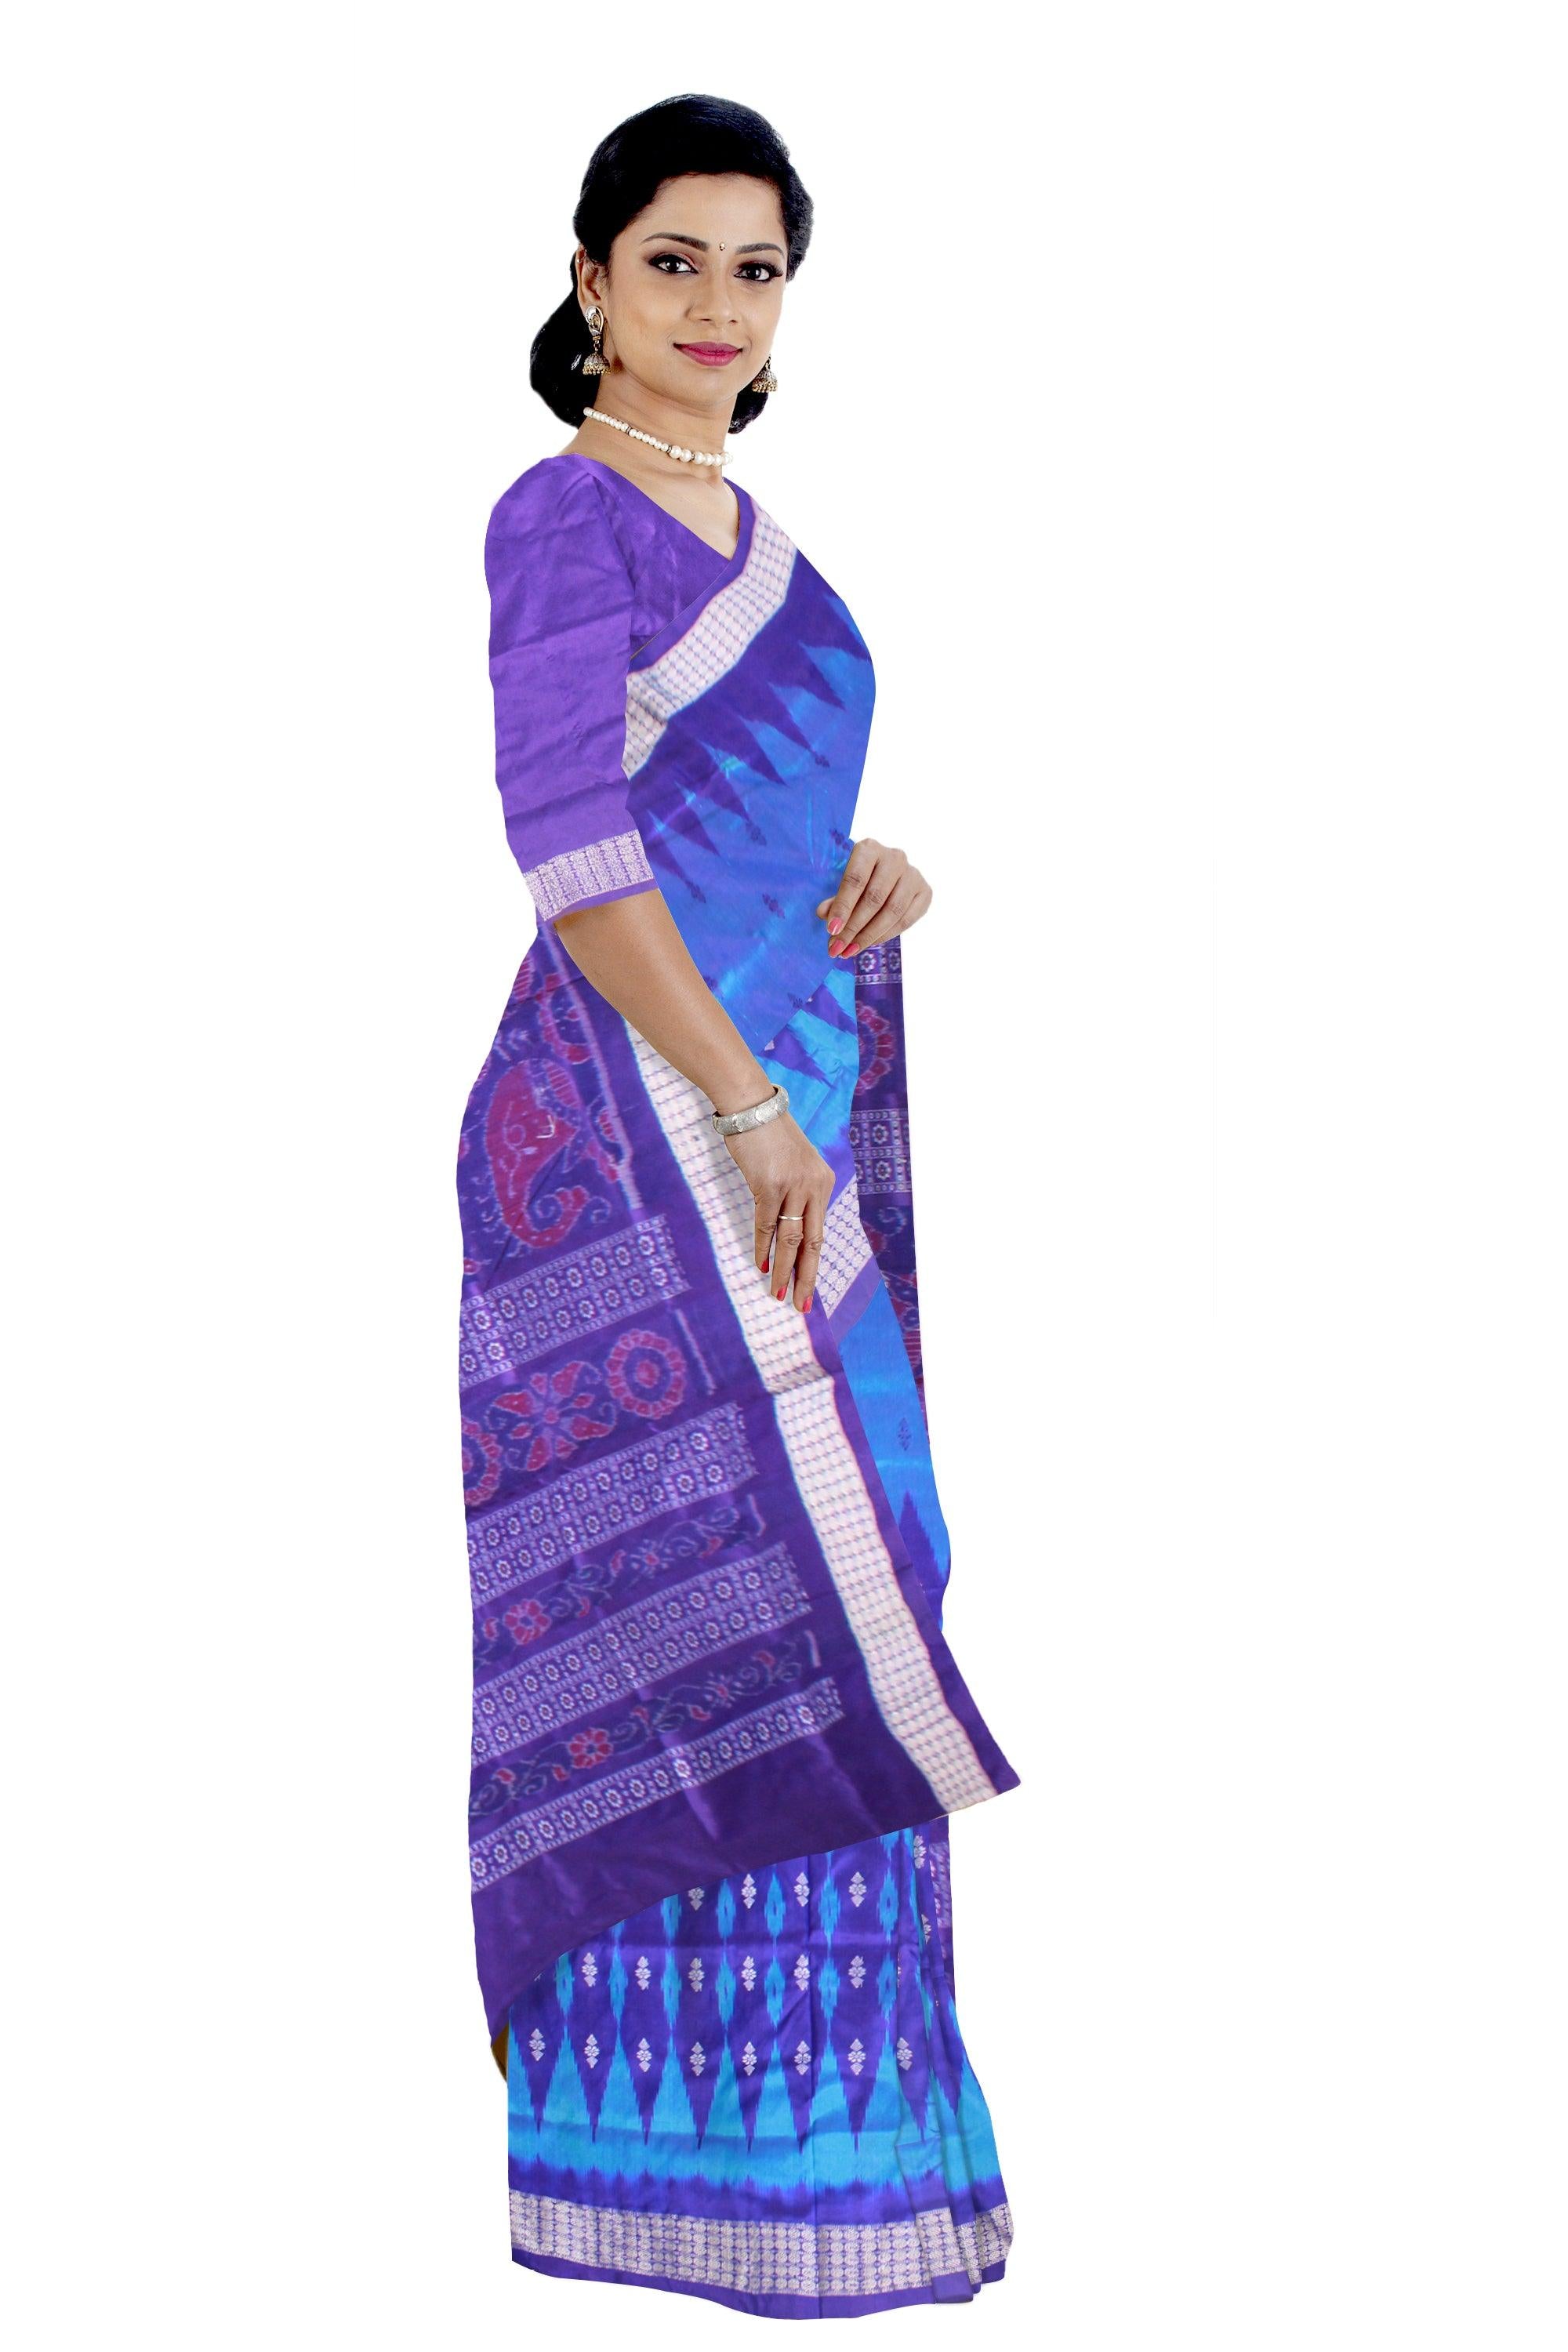 KUMBHA PATTERN PATA SAREE IS SKY AND LIGHT SKY COLOR BASE,COMES WITH MATCHING BLOUSE PIECE. - Koshali Arts & Crafts Enterprise